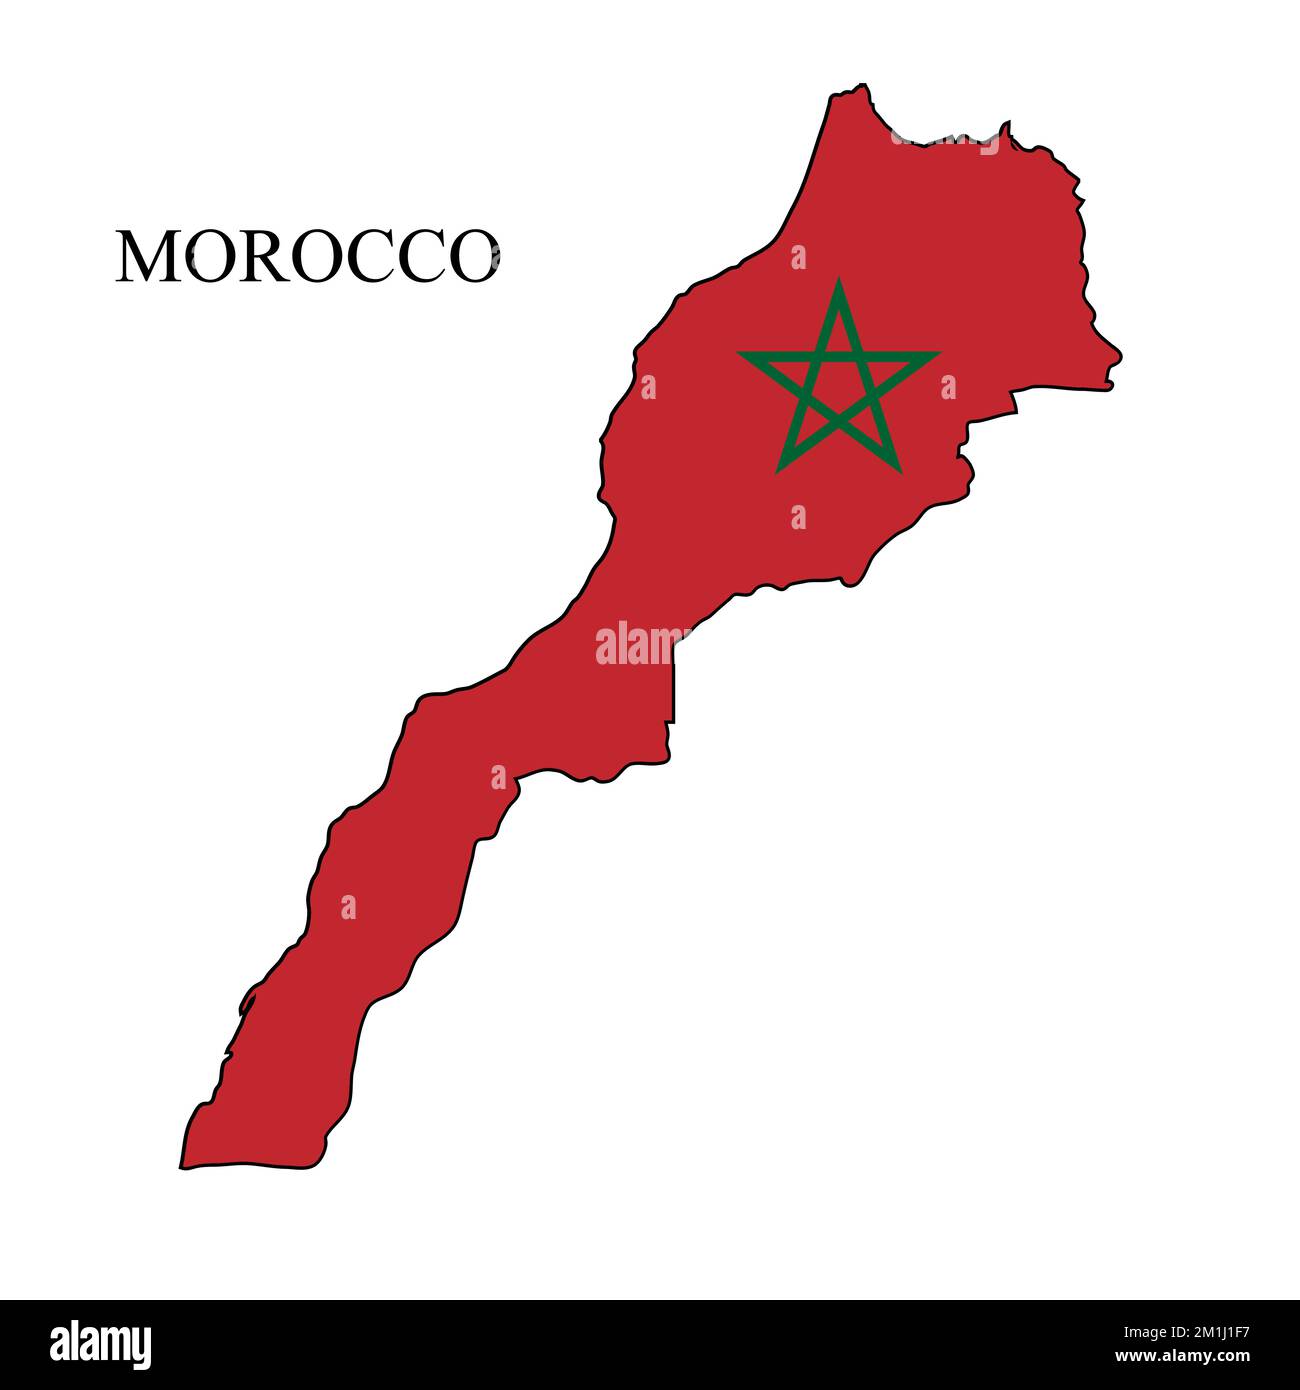 Morocco map vector illustration. Global economy. Famous country. Northern Africa. Africa. Stock Vector